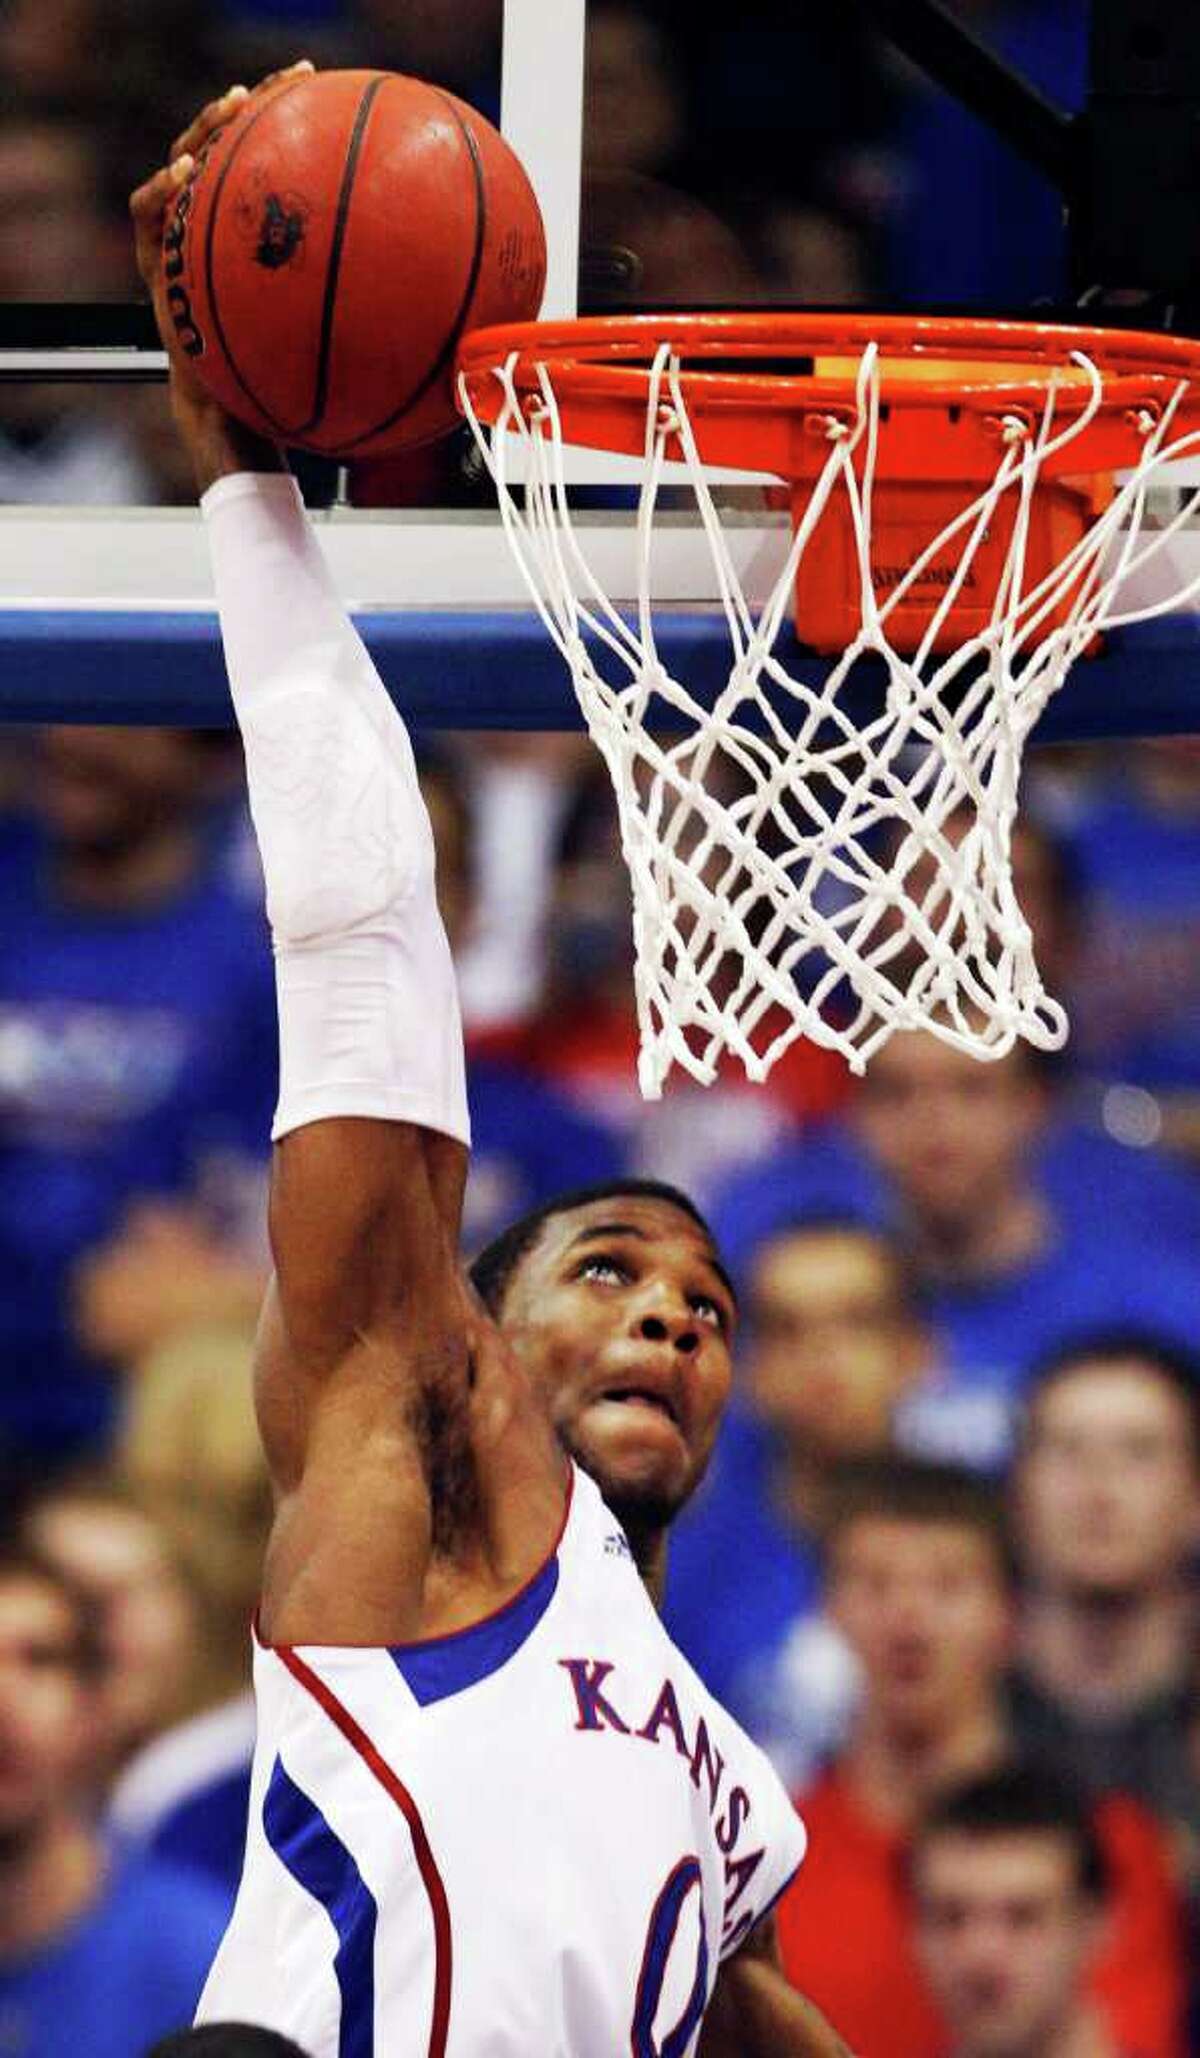 Kansas forward Thomas Robinson (0) attempts a dunk during the second half of an NCAA college basketball game against Texas Tech in Lawrence, Kan., Saturday, Feb. 18, 2012. Robinson contributed 16 points as Kansas won 83-50.